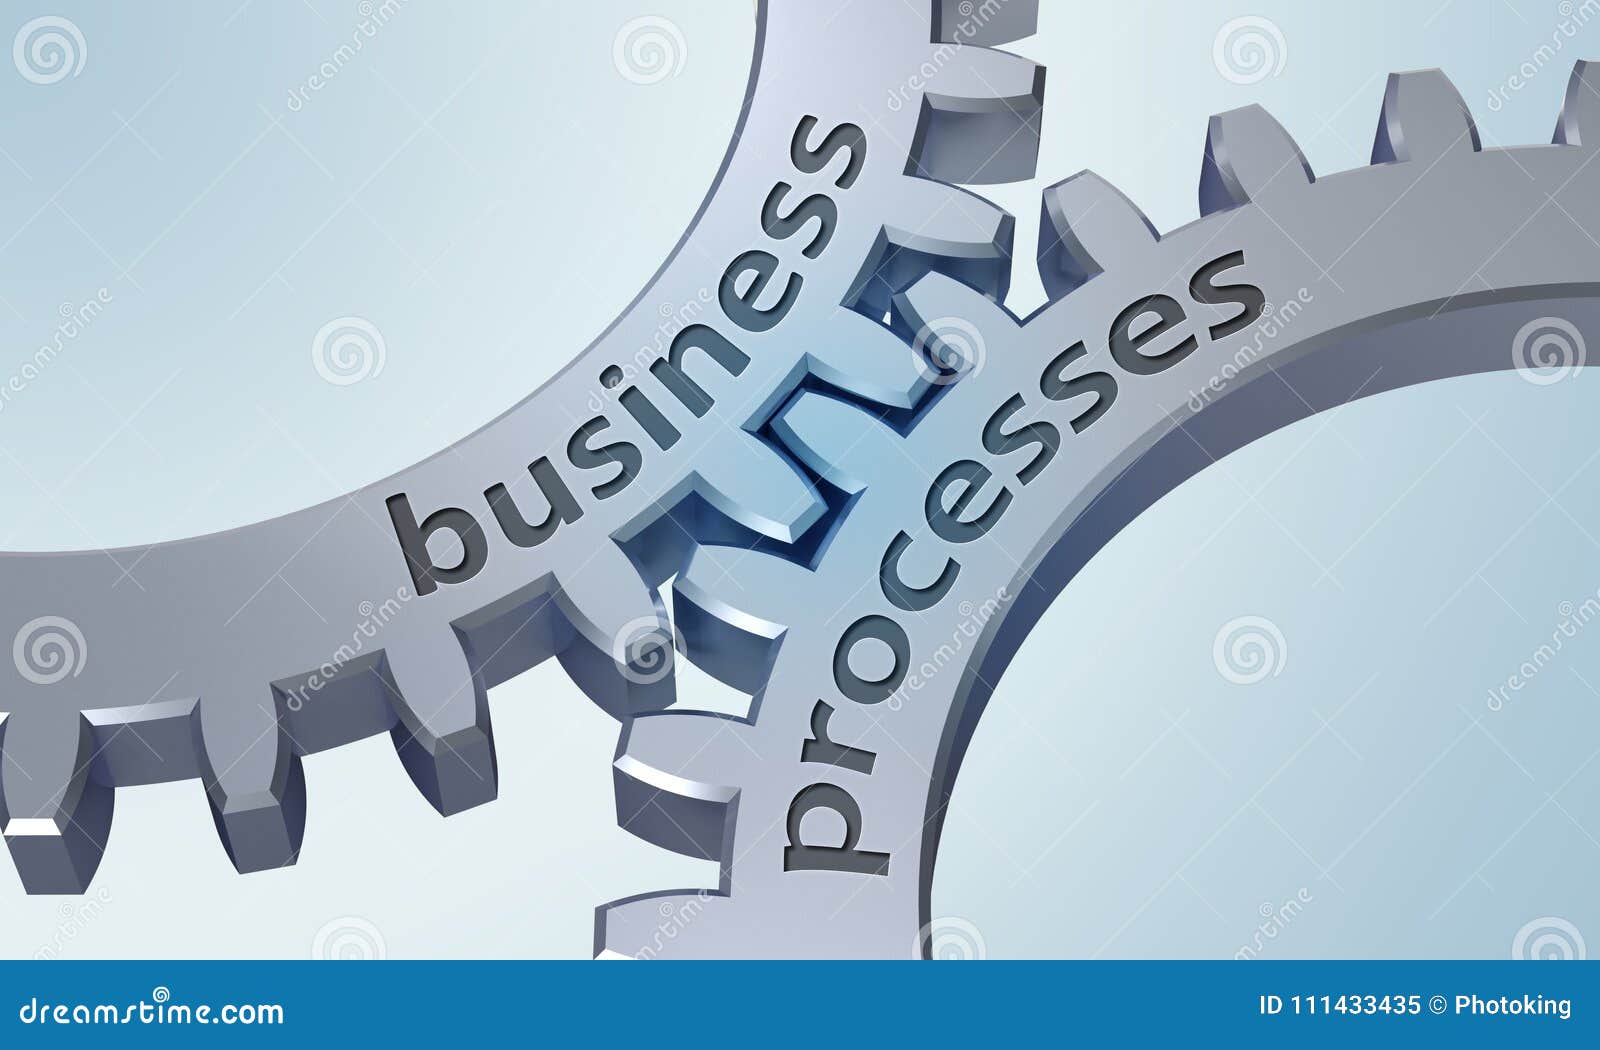 business processes on metal gears